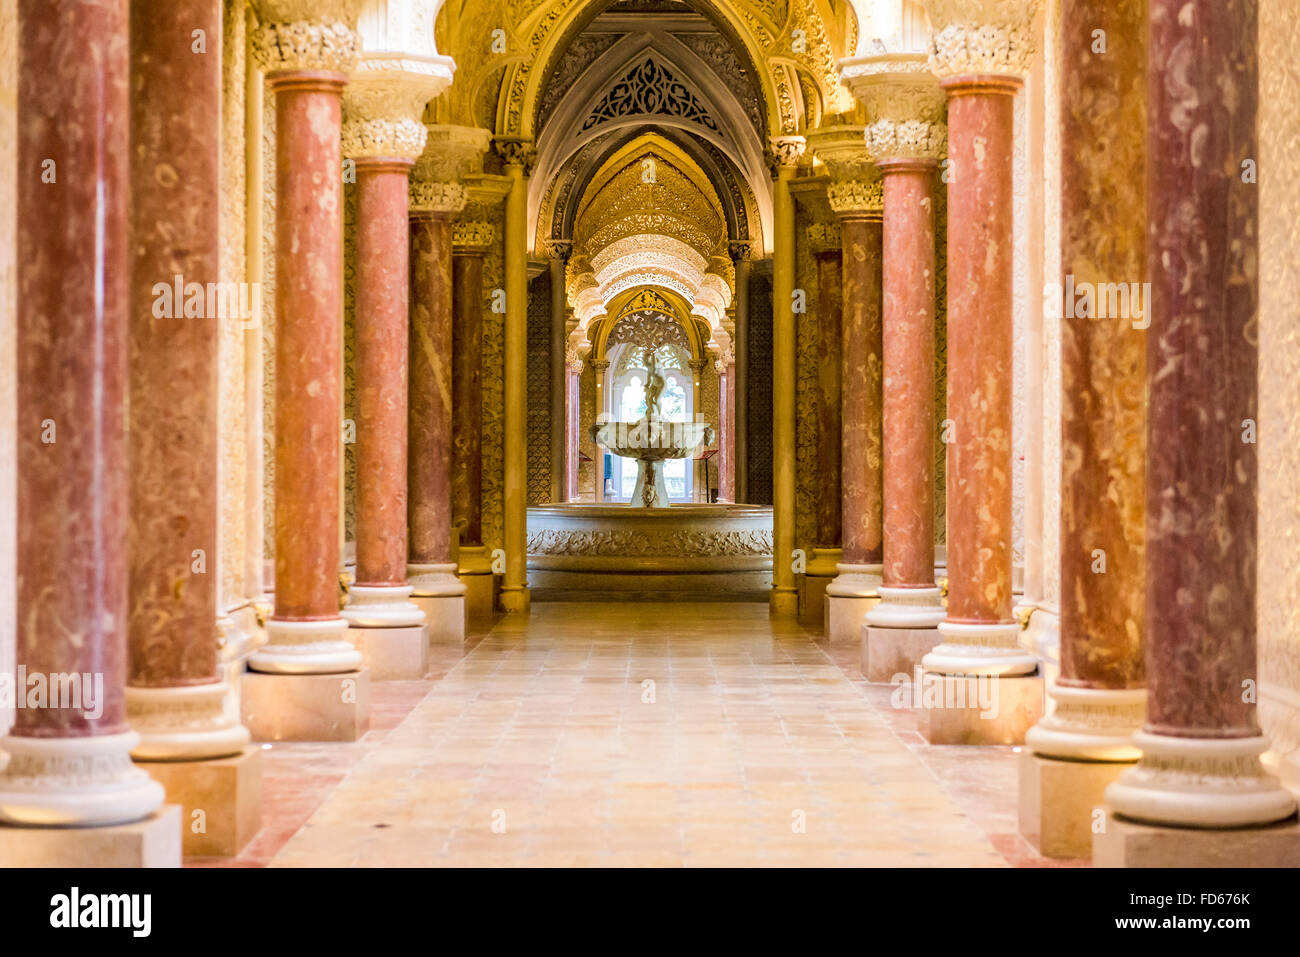 Monserrate Palace Interieur in Sintra, Portugal. Stockfoto